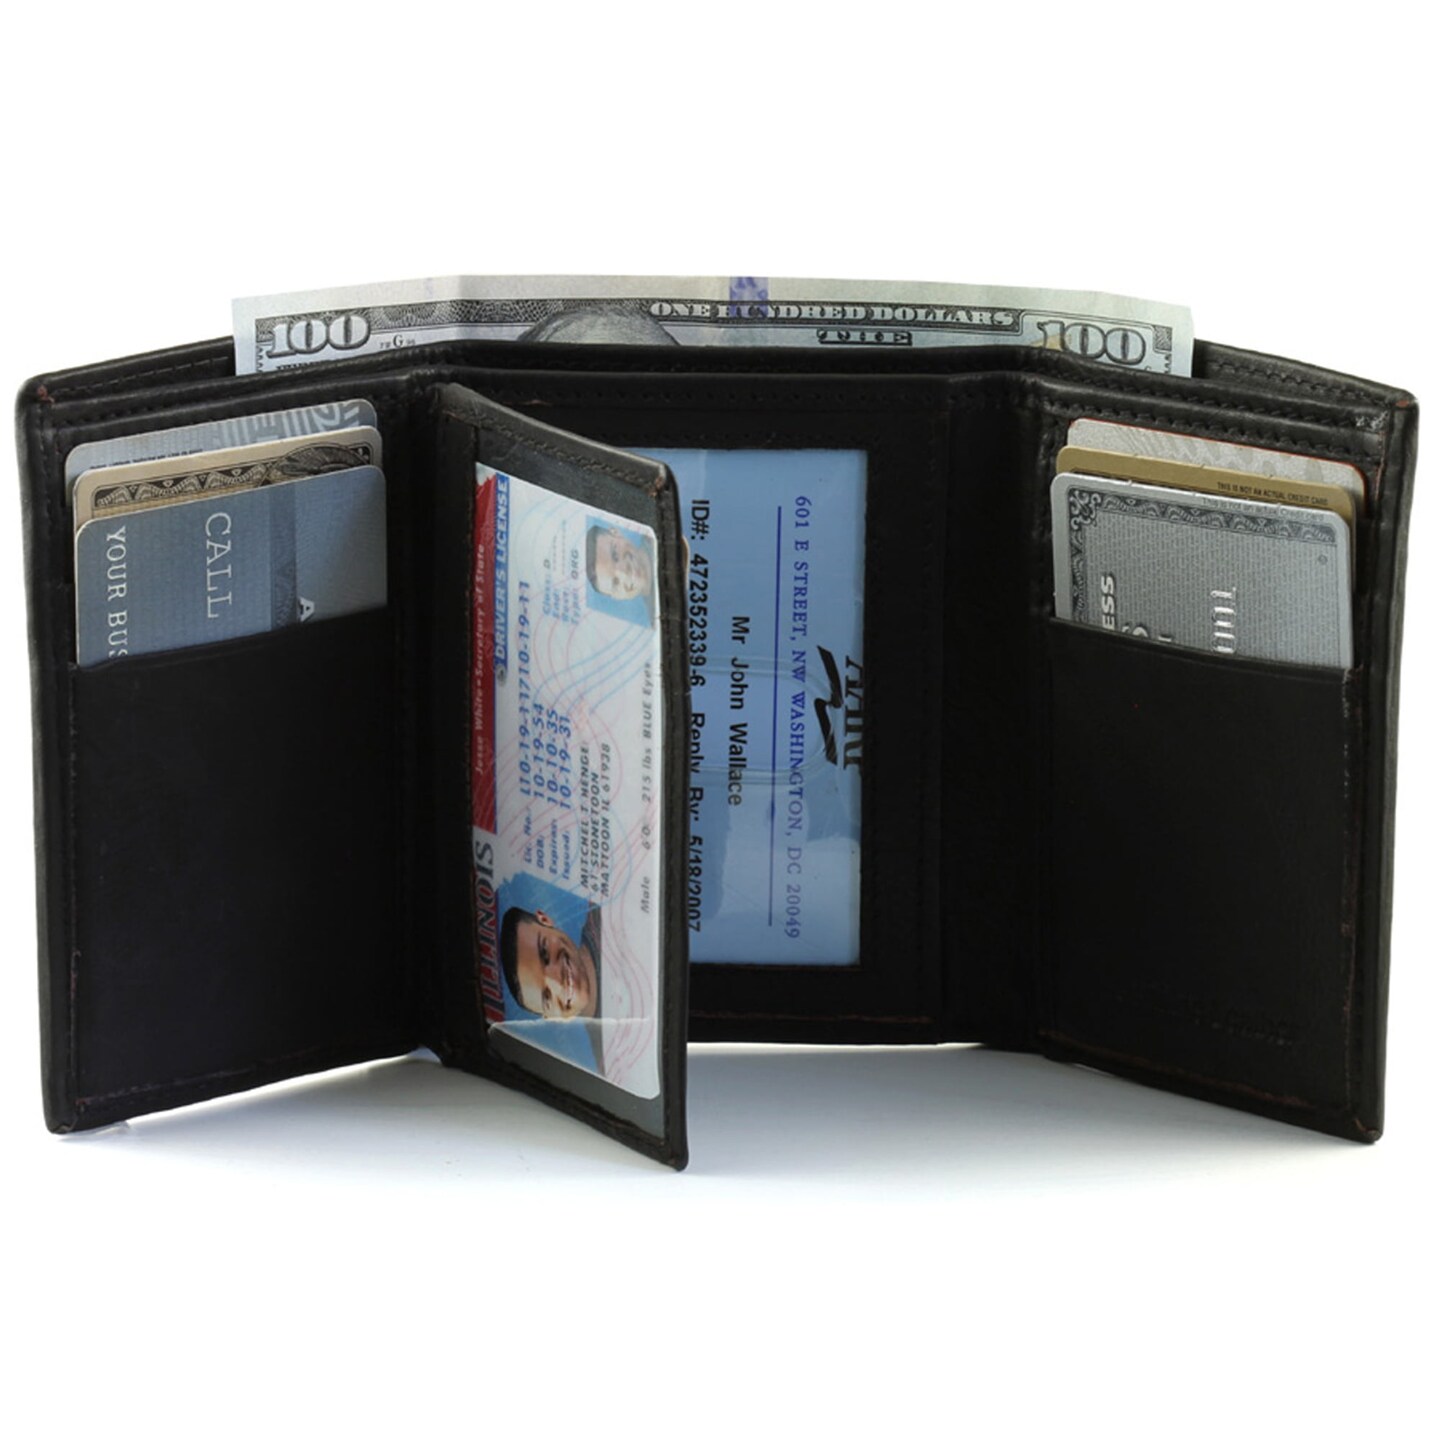 Trifold Wallets For Men RFID - Leather Slim Mens Wallet With ID